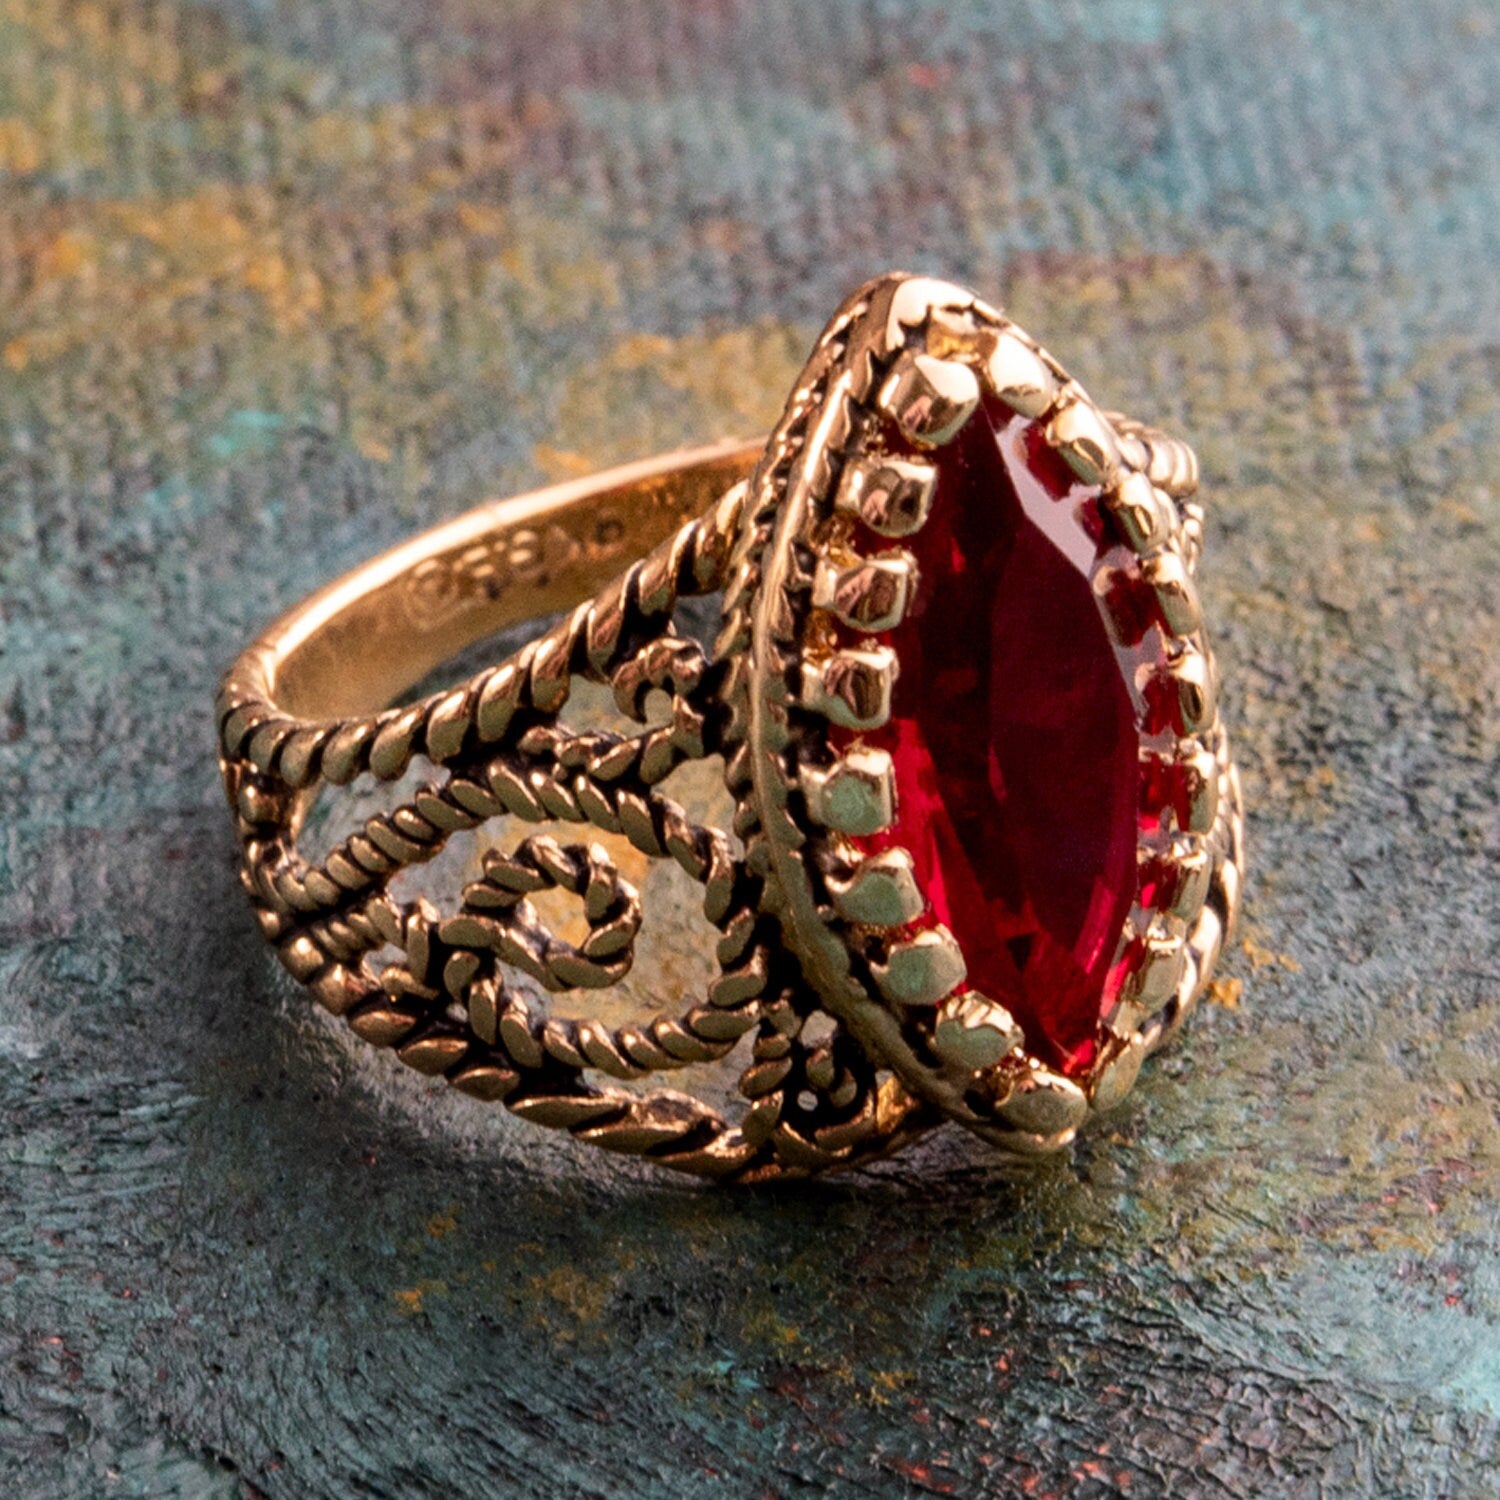 Vintage Ring Austrian Crystal Antique 18k Gold Filigree Edwardian Style  Womans Victorian Jewelry R1444 - Ruby Gold / 5